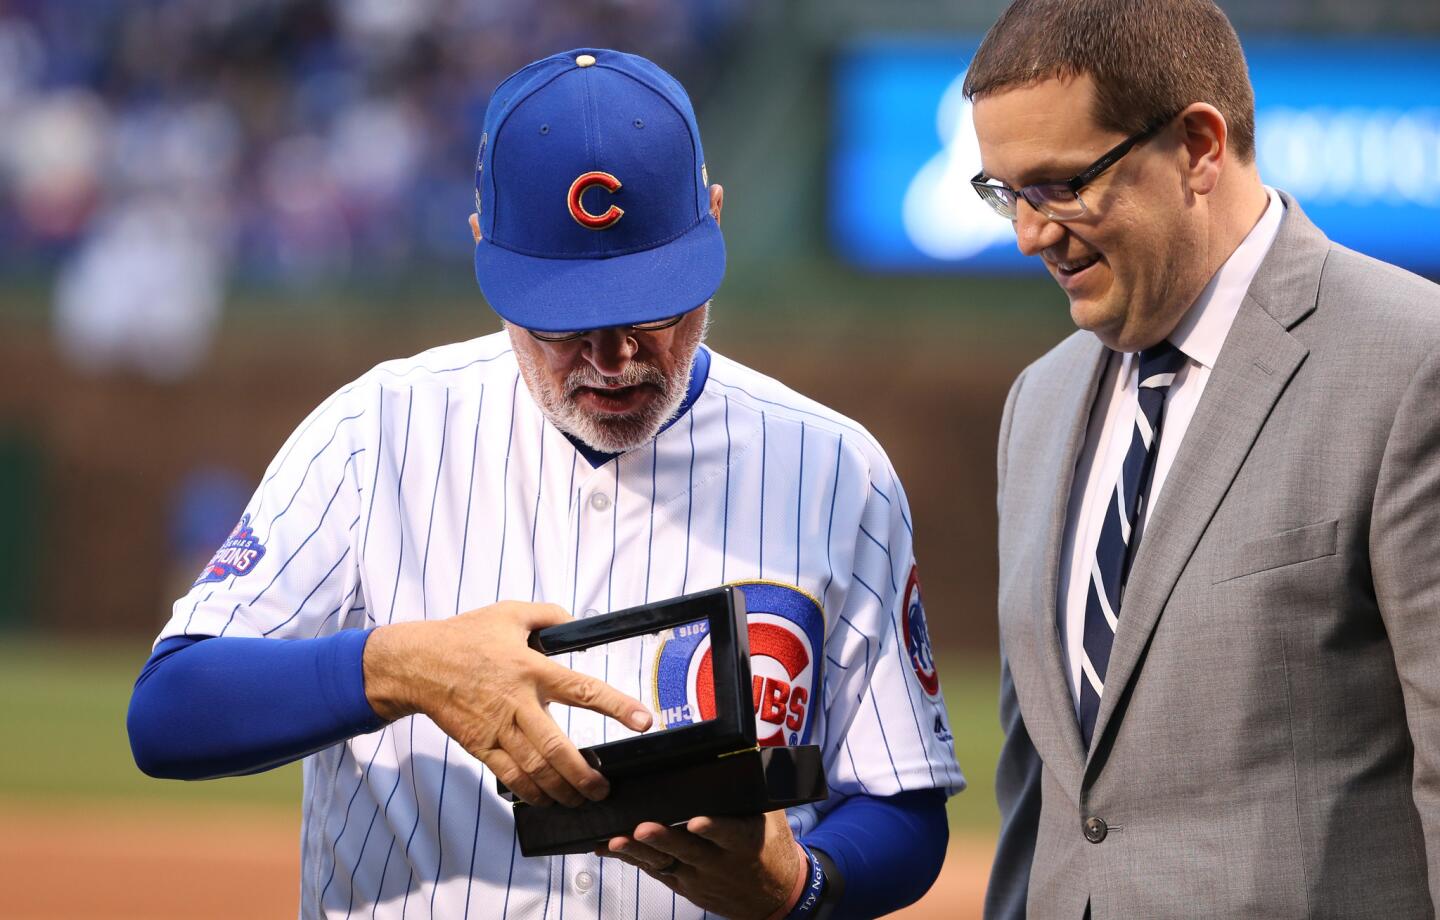 Cubs manager Joe Maddon looks at his new jewelry as the team is presented with their 2016 world championship rings before a game against the Dodgers at Wrigley Field on Wednesday, April 12, 2017.